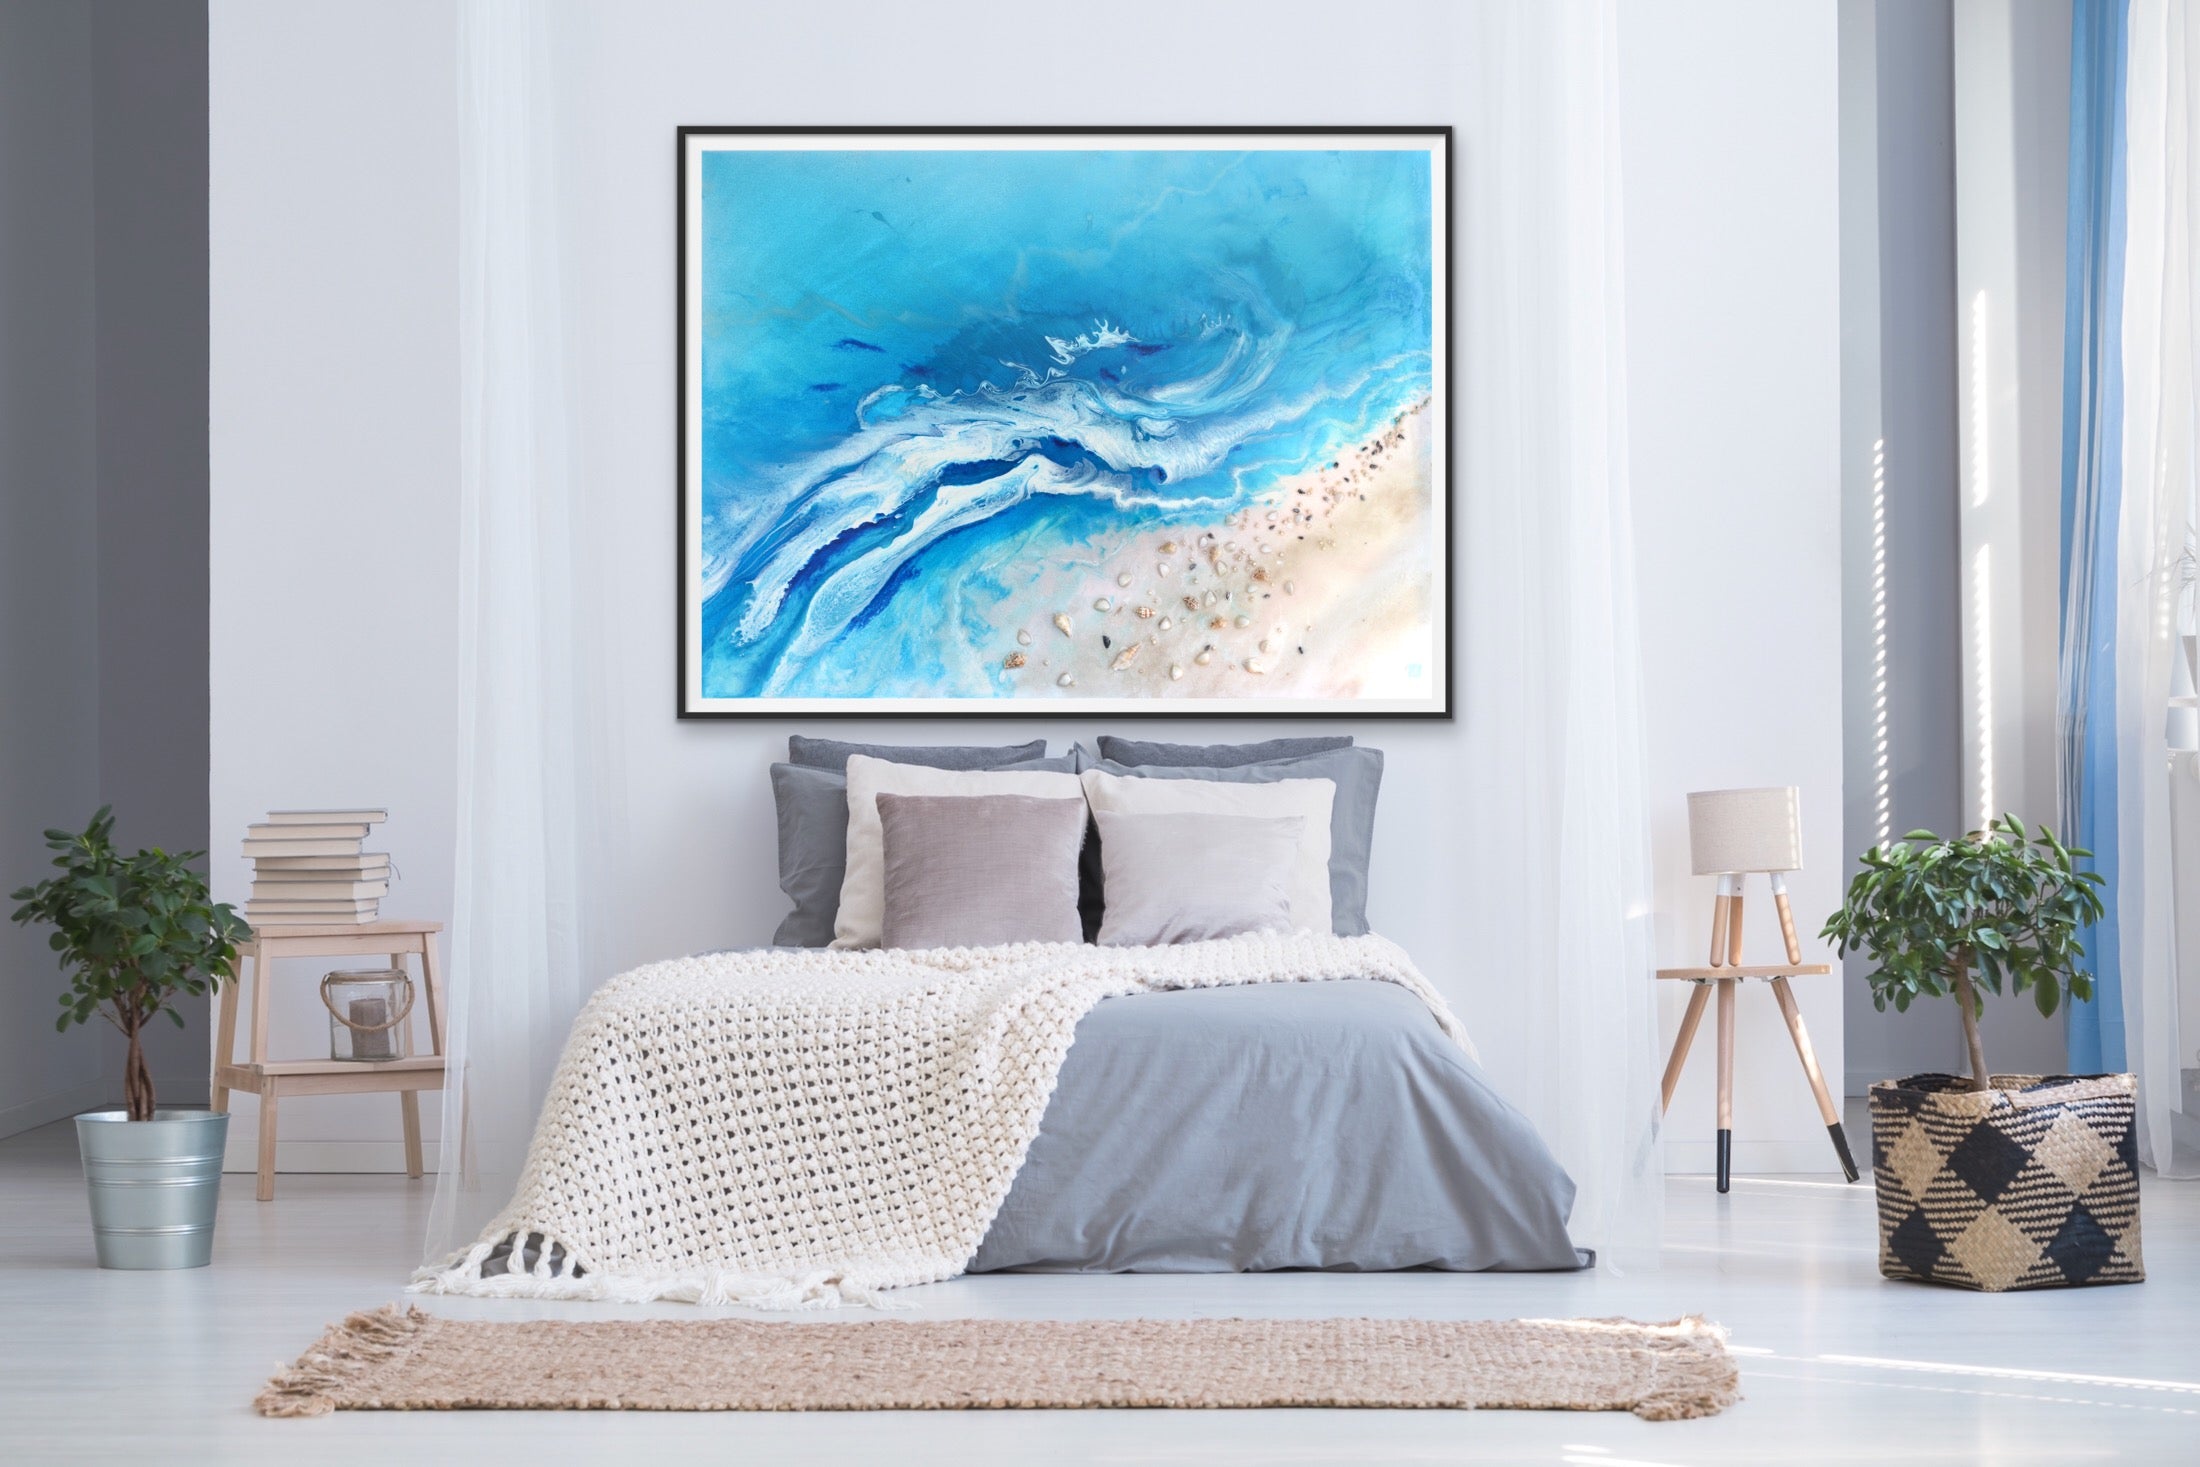 Abstract Seascape. Teal Ocean. Bali Utopia 4. Art Print. Antuanelle 3 Limited Edition Print